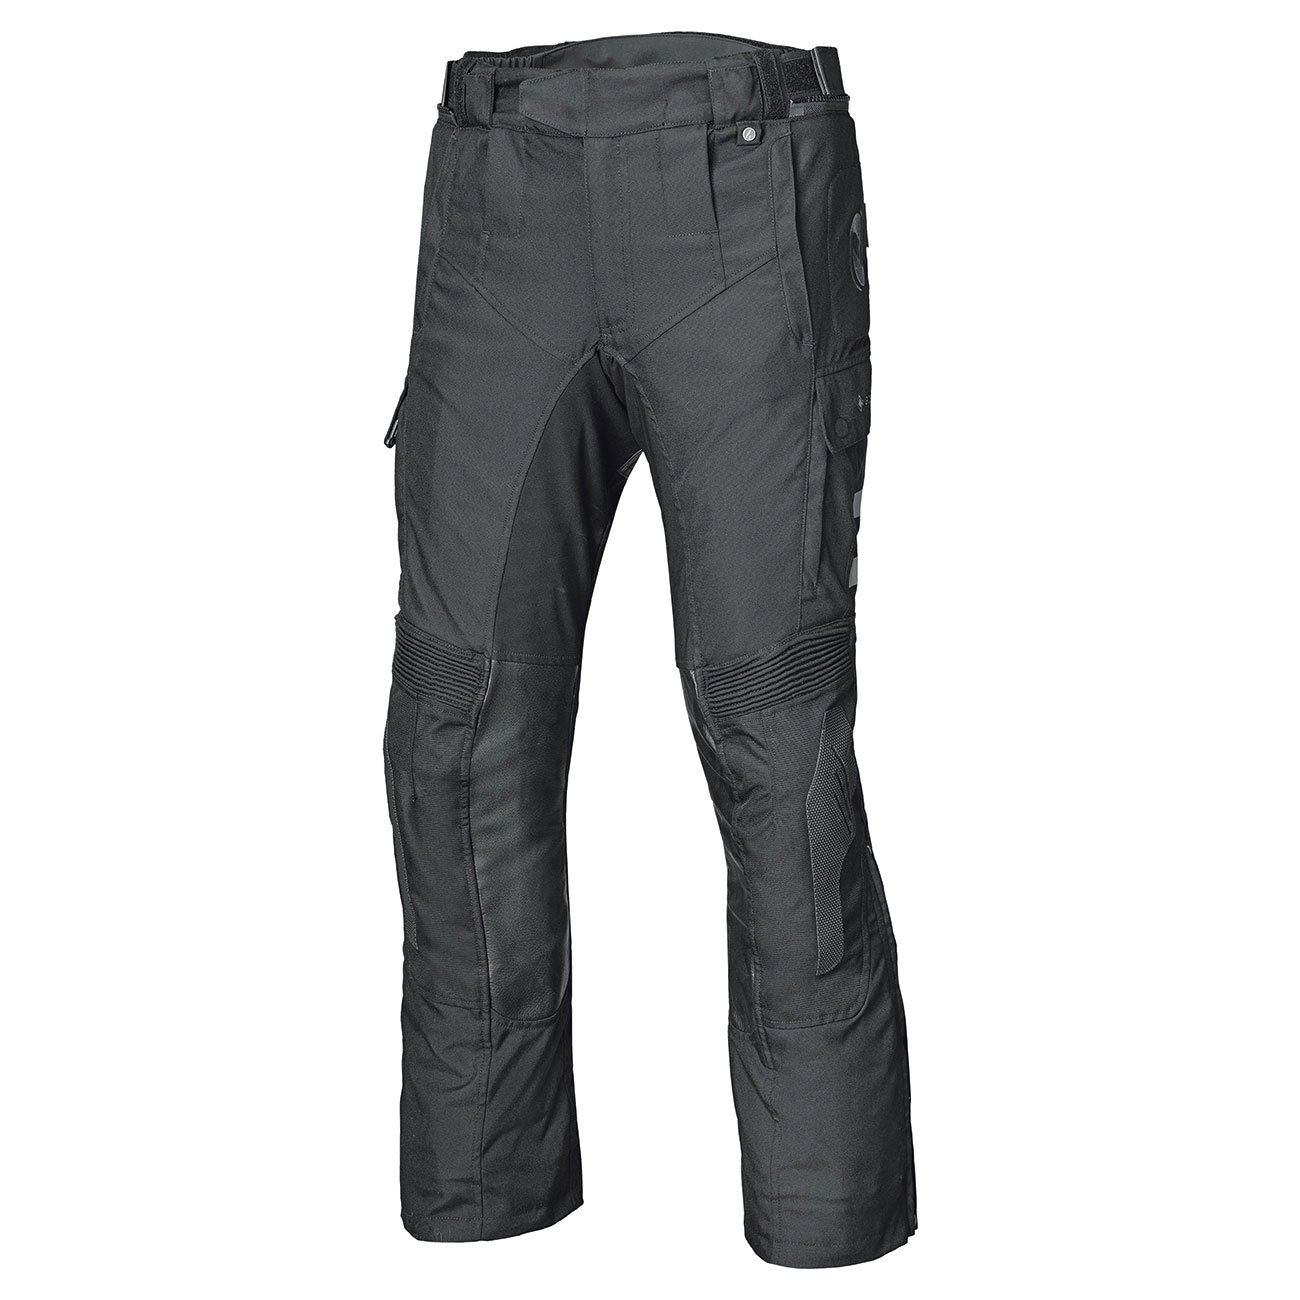 Image of Held Torno Evo Gore Tex® Touring Pants Black Size M ID 4049462891449